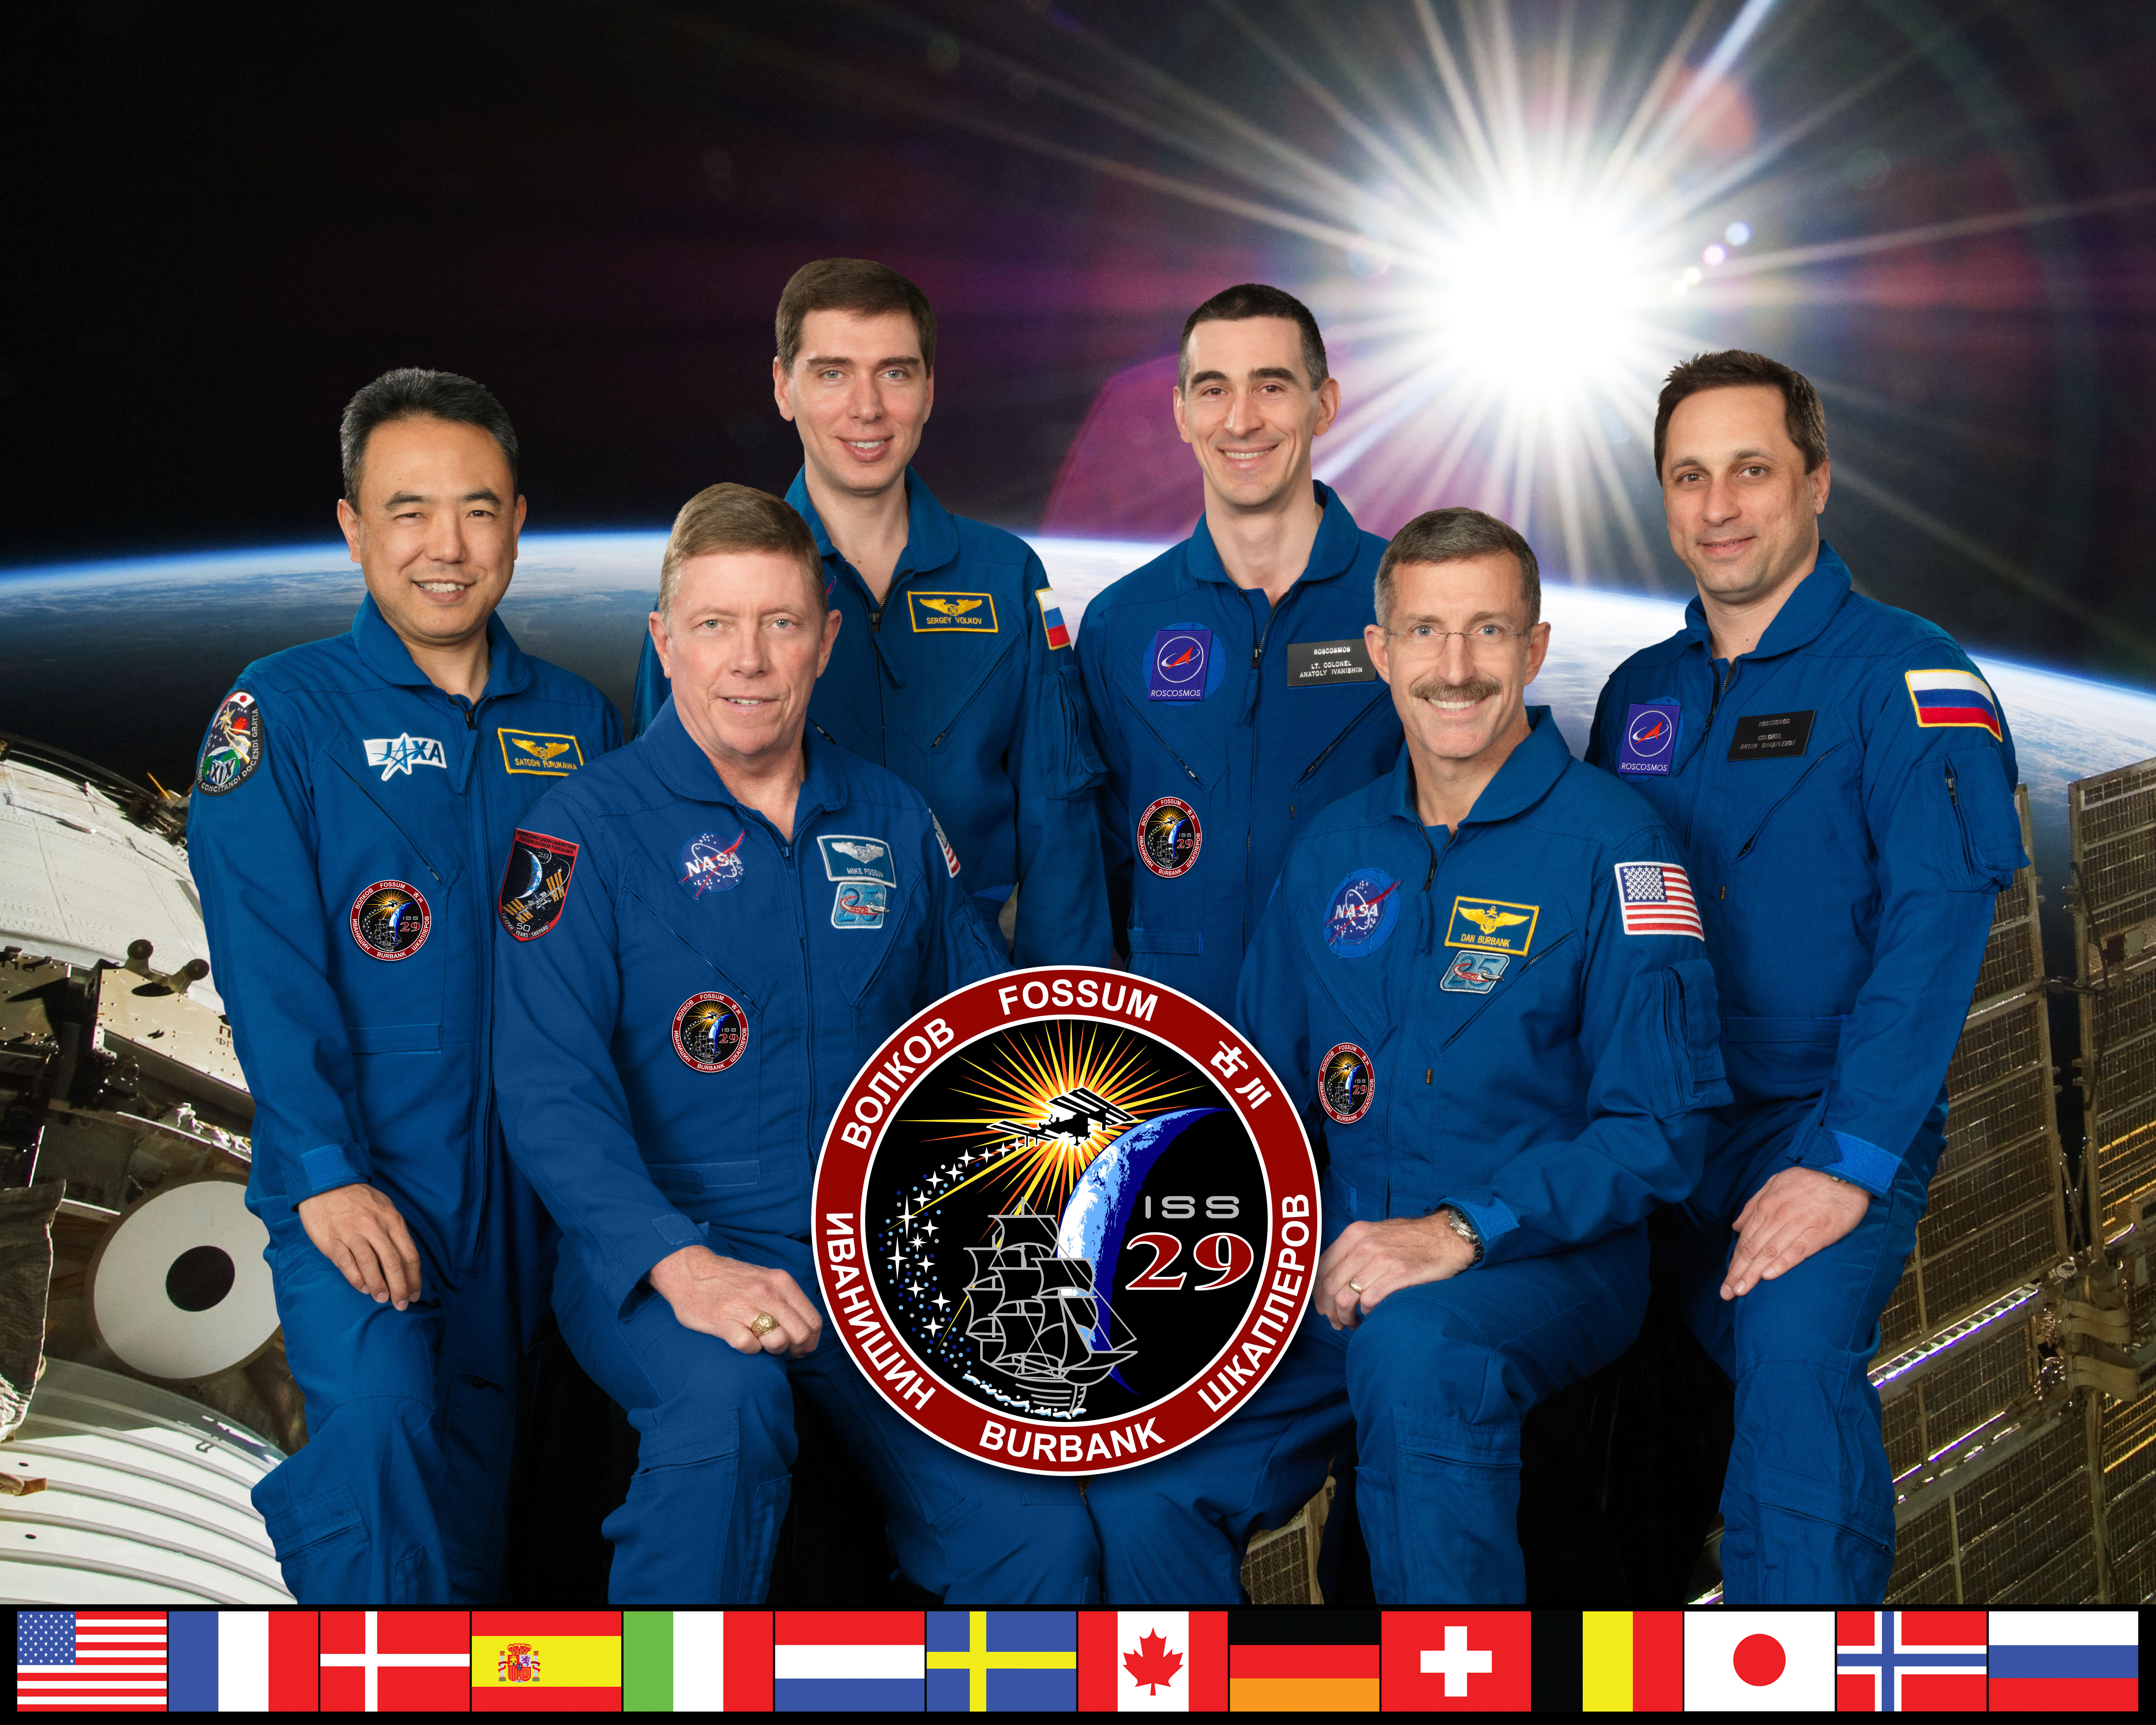 Expedition 29 Official Crew Portrait